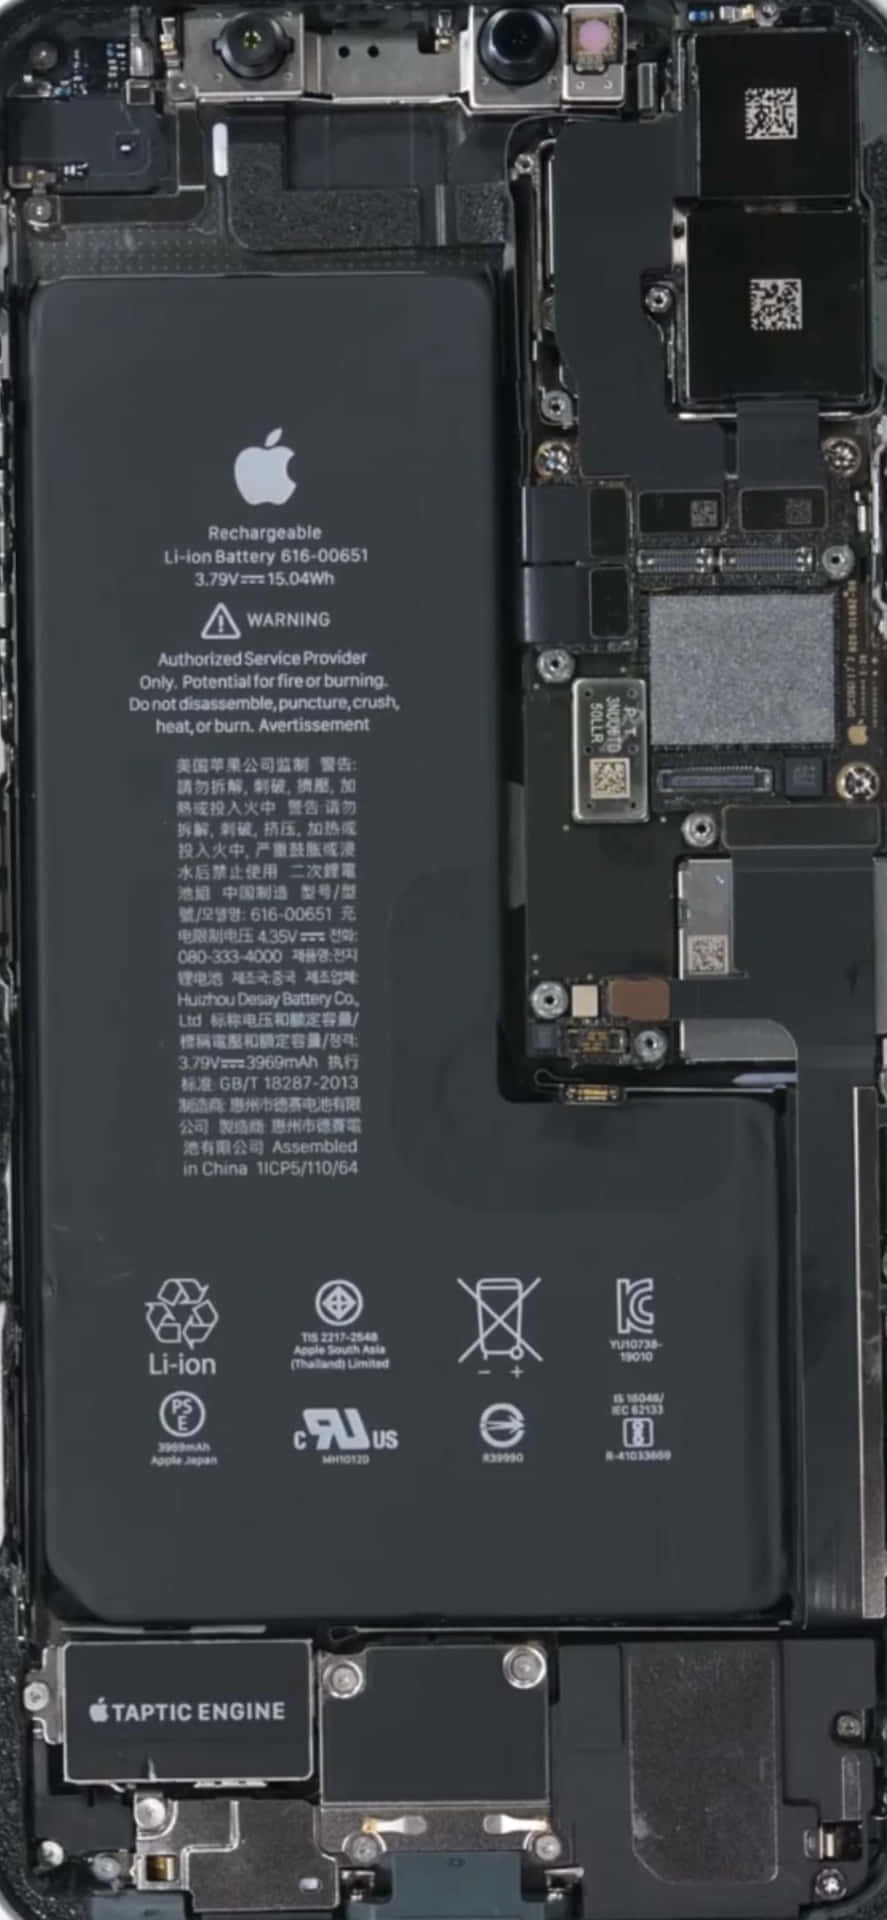 Explore The Inner Workings Of The Phone. Wallpaper